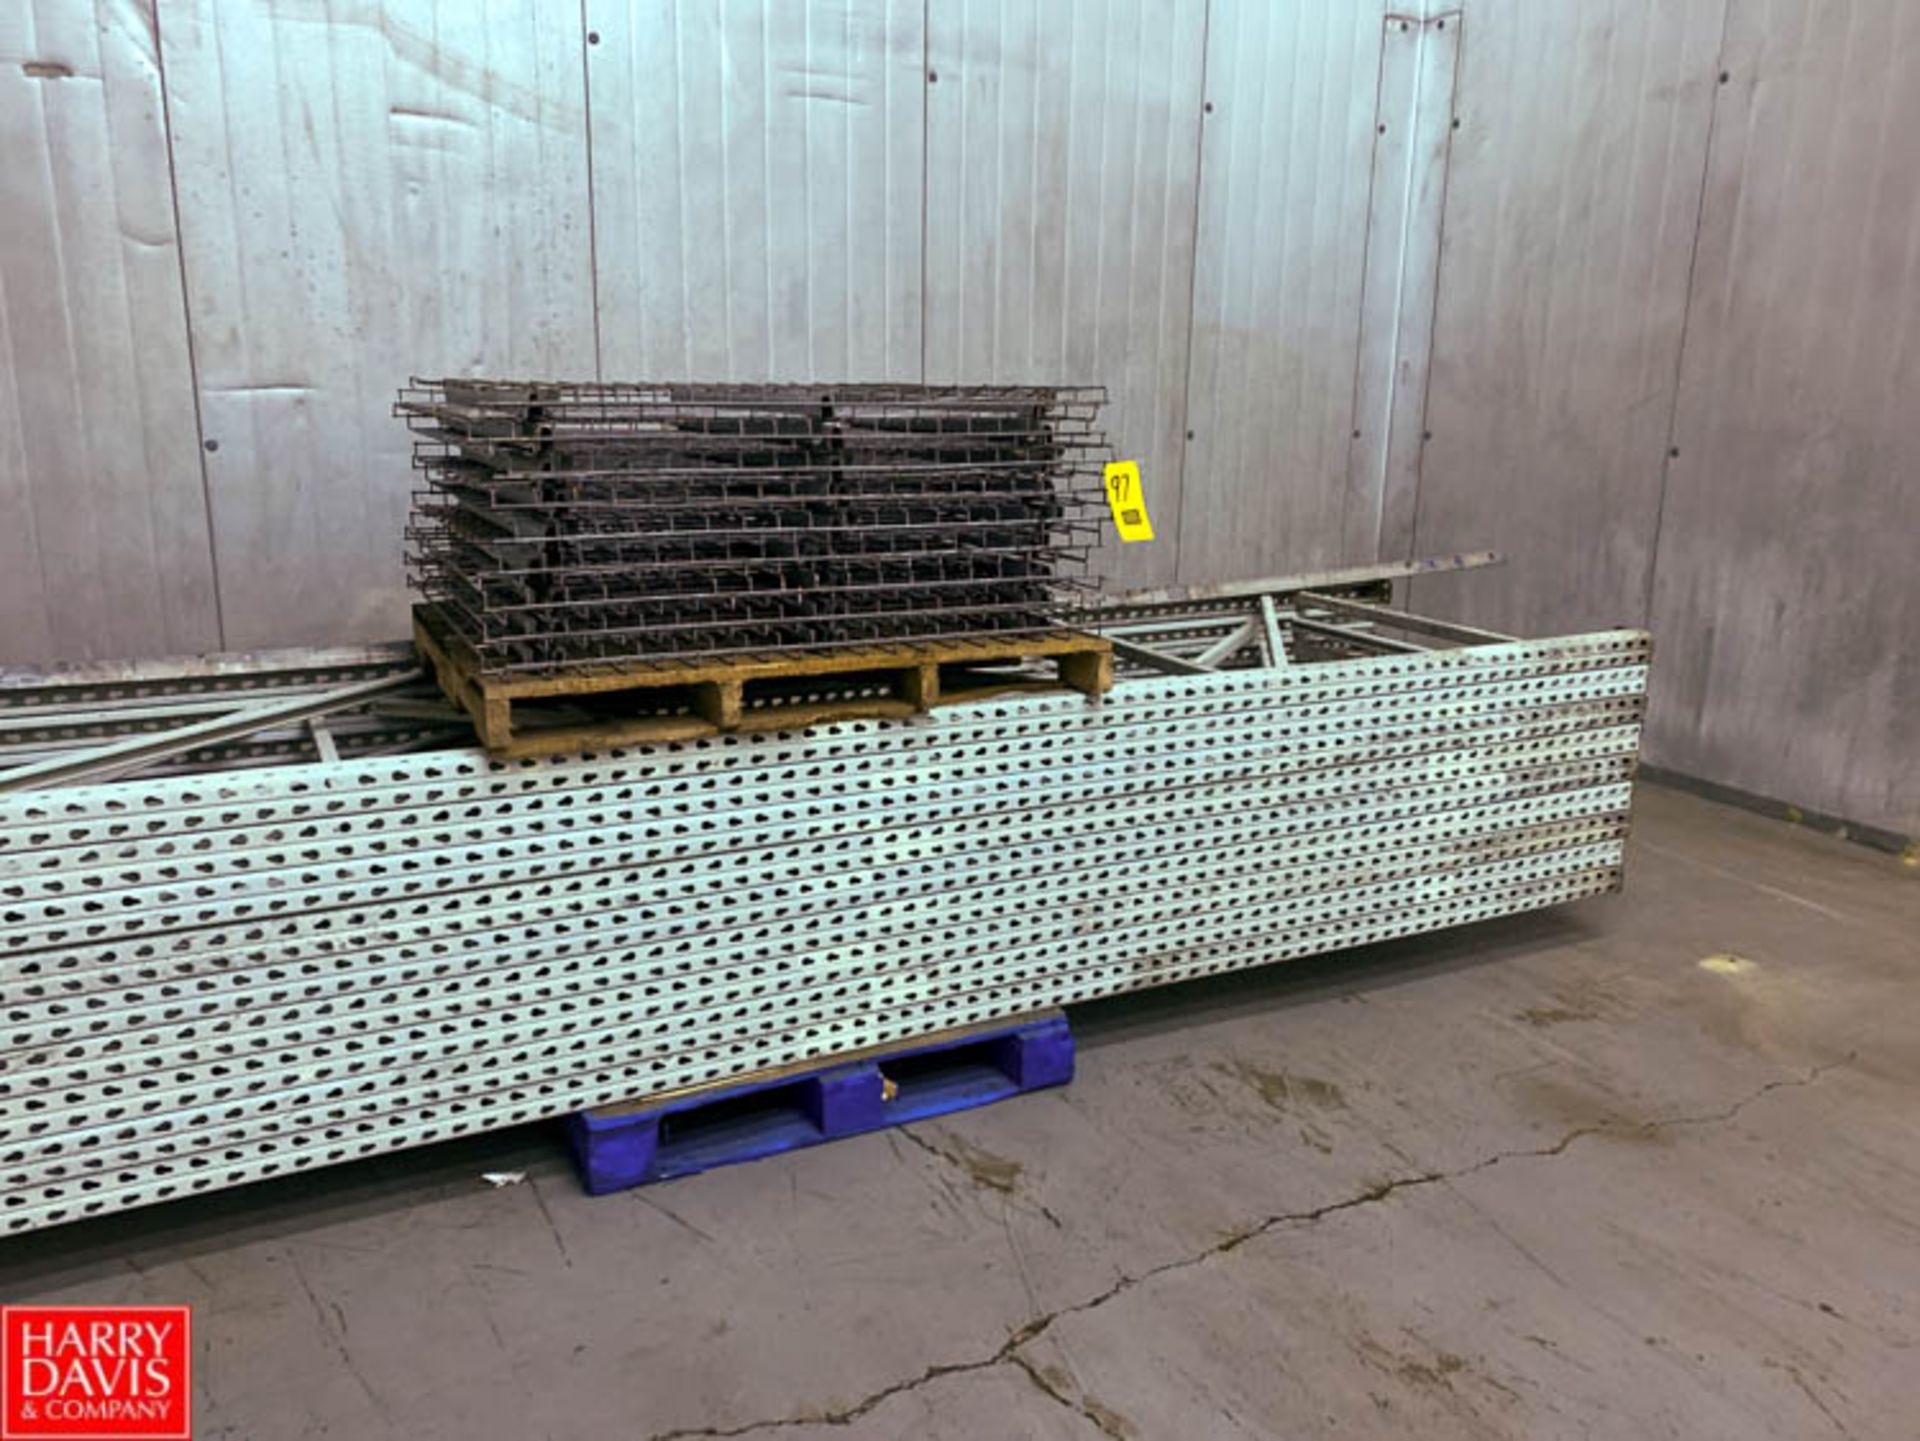 (9) Pallet Racking Uprights and (1) Pallet of Wire Beds Rigging: 400